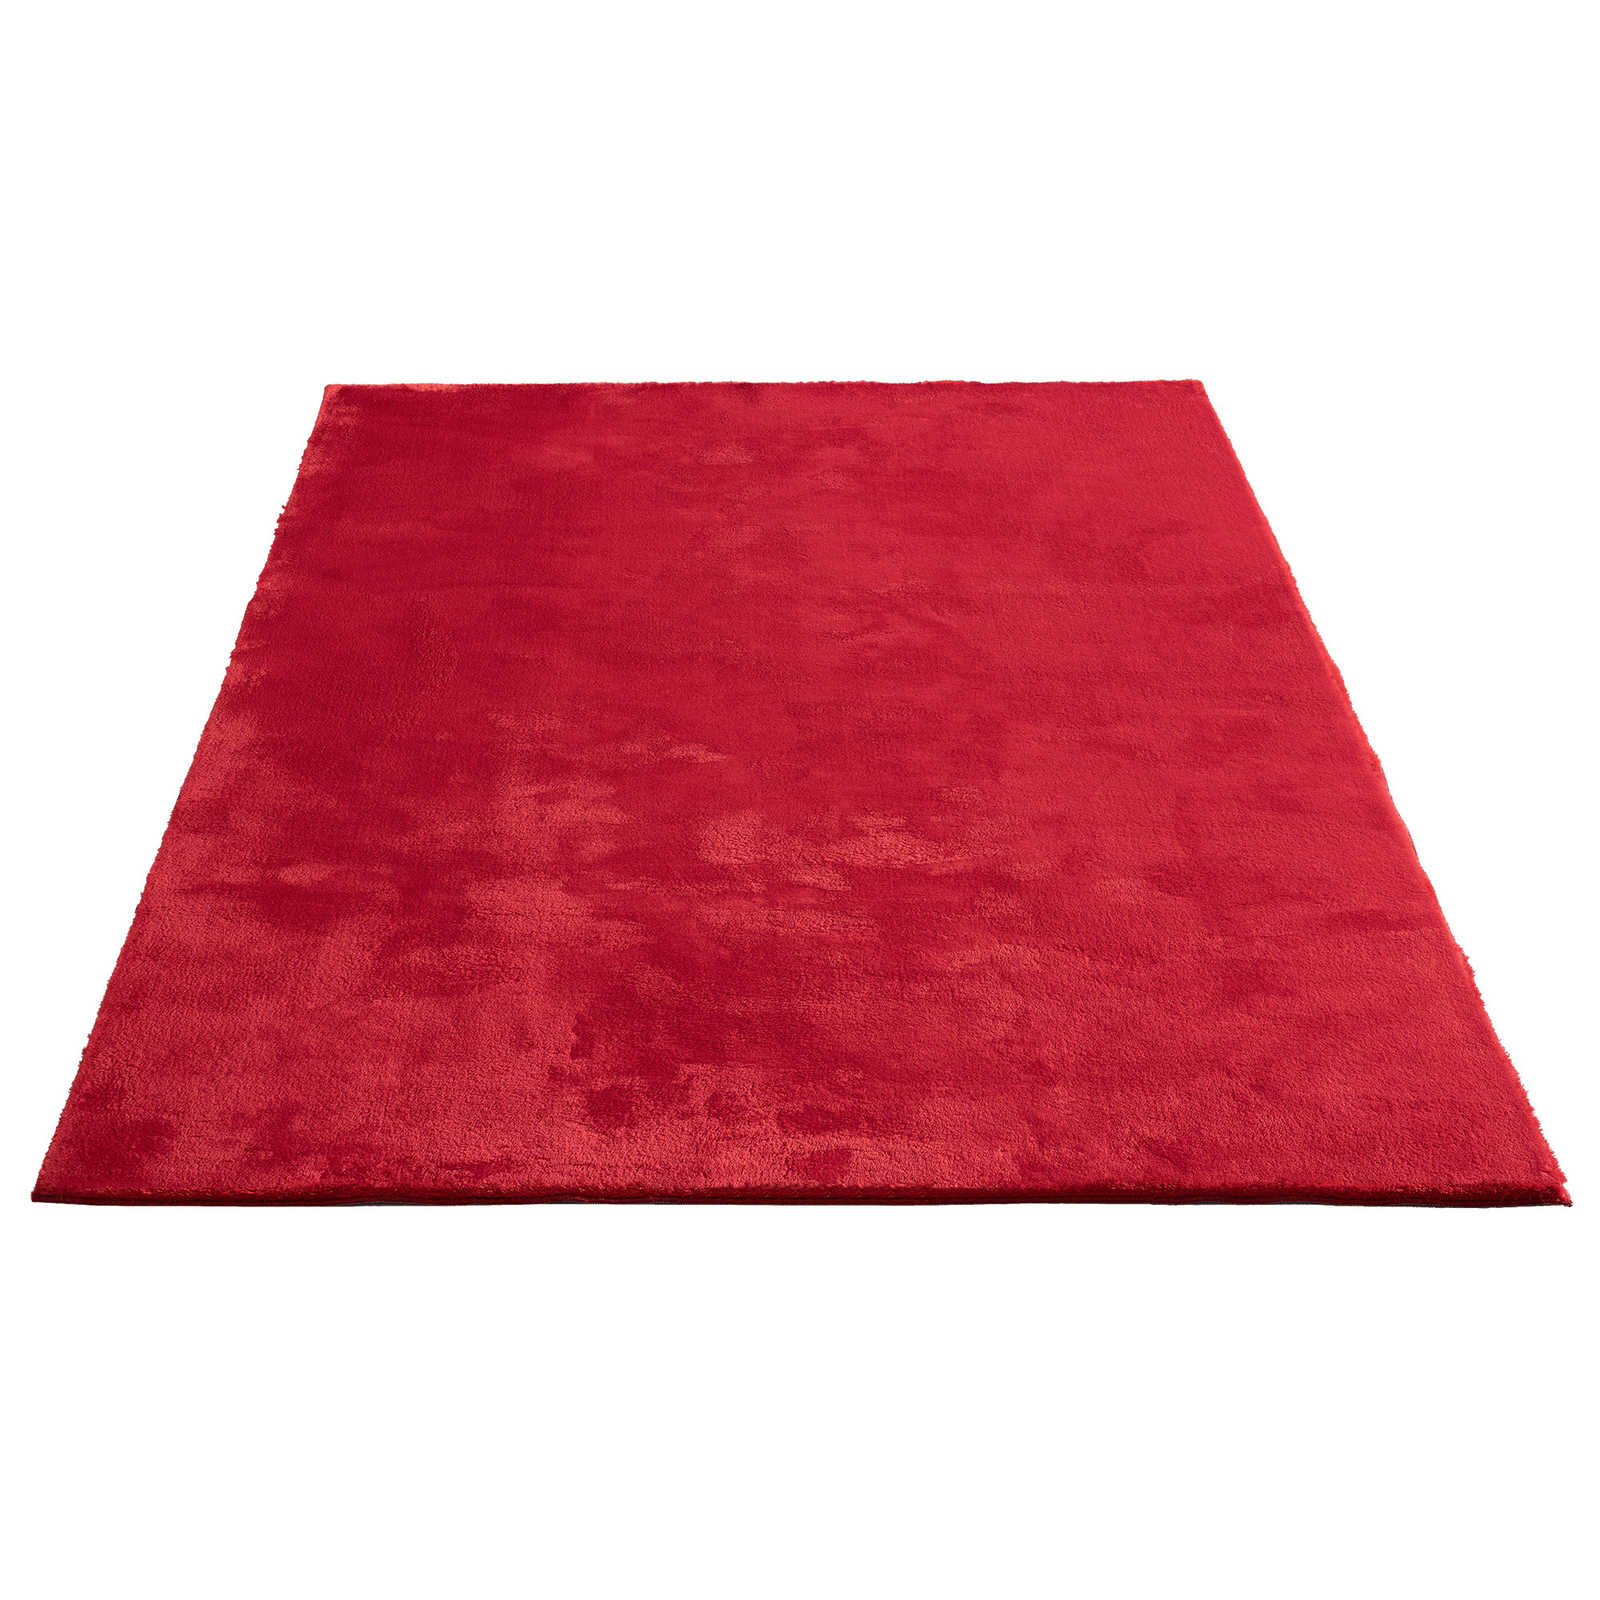 Extra soft high pile carpet in red - 290 x 200 cm
